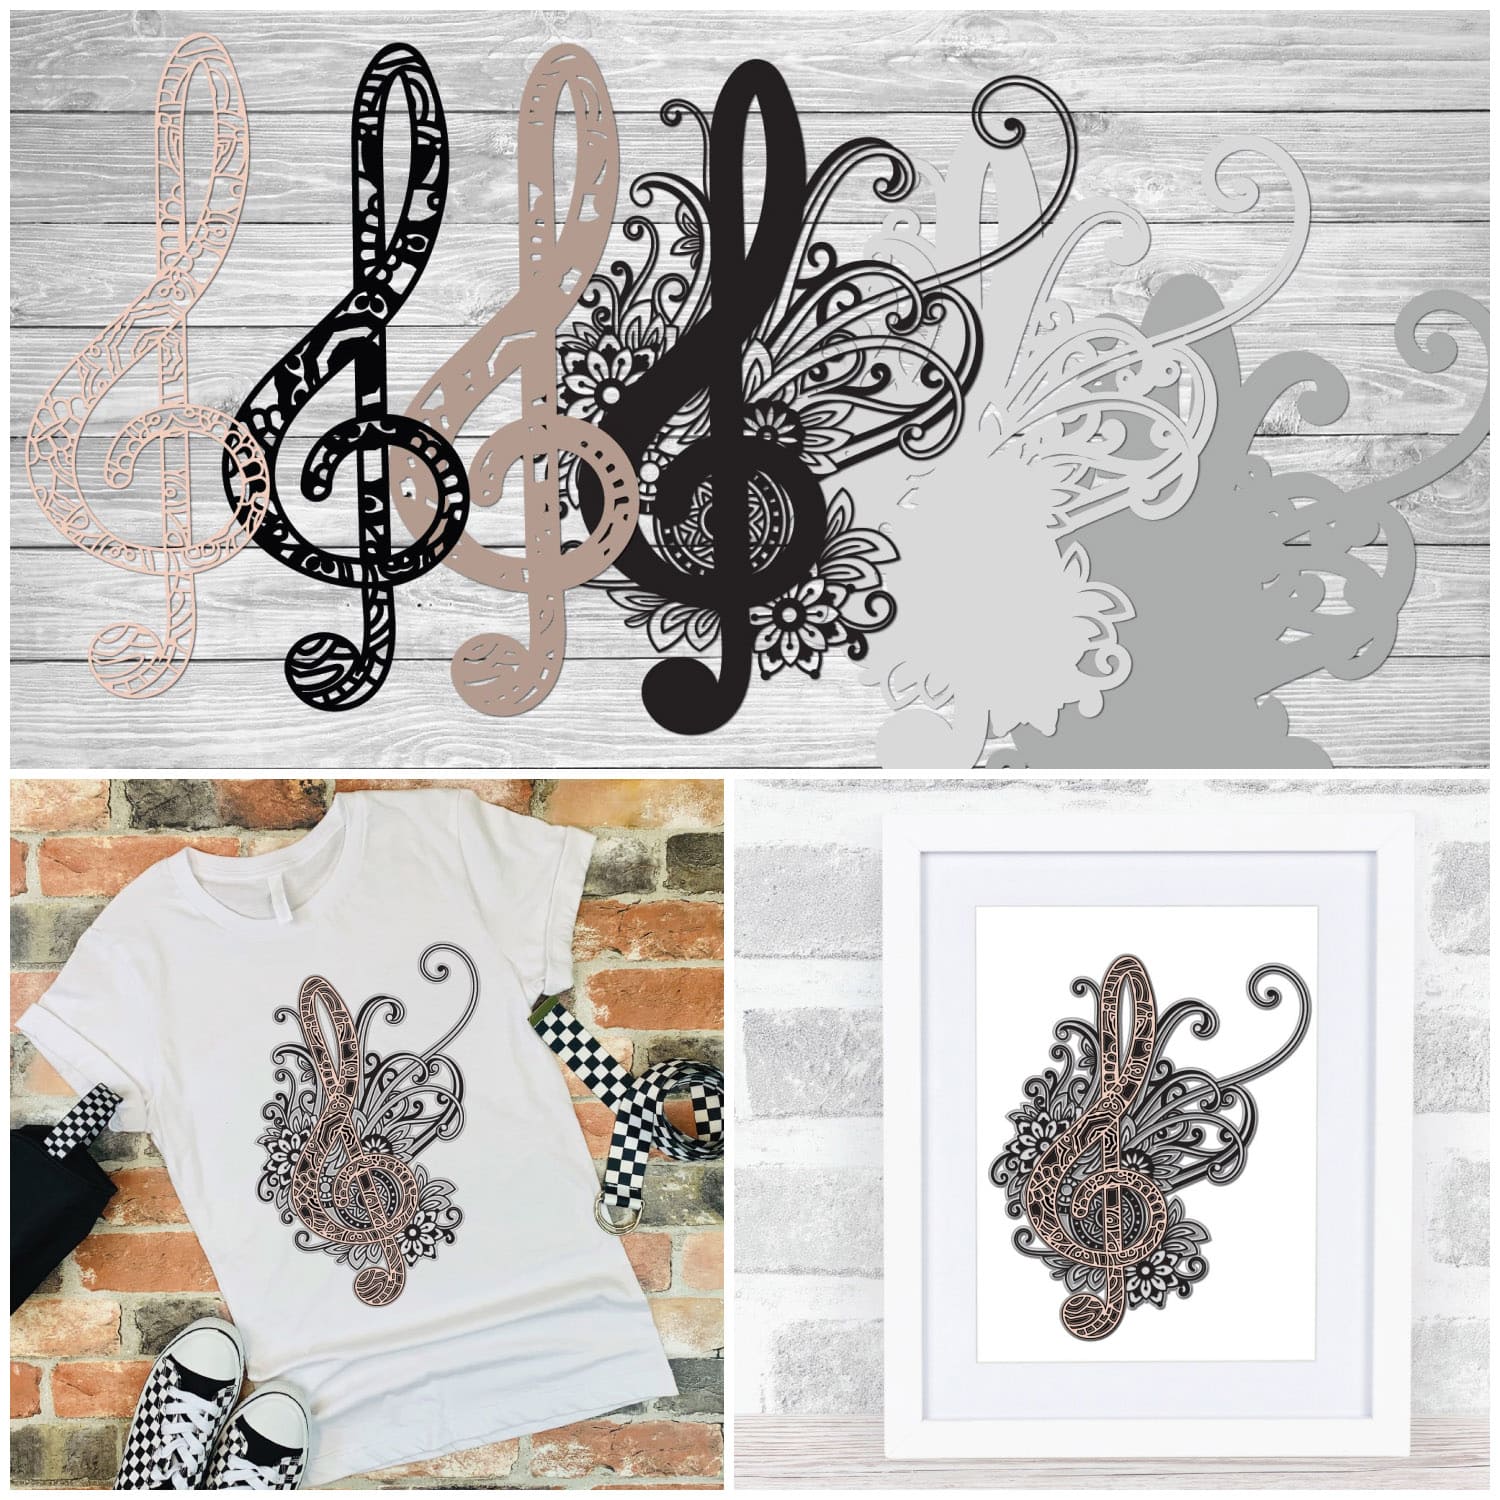 3d Layered Treble Clef SVG | Music Notes SVG | Cut File cover.